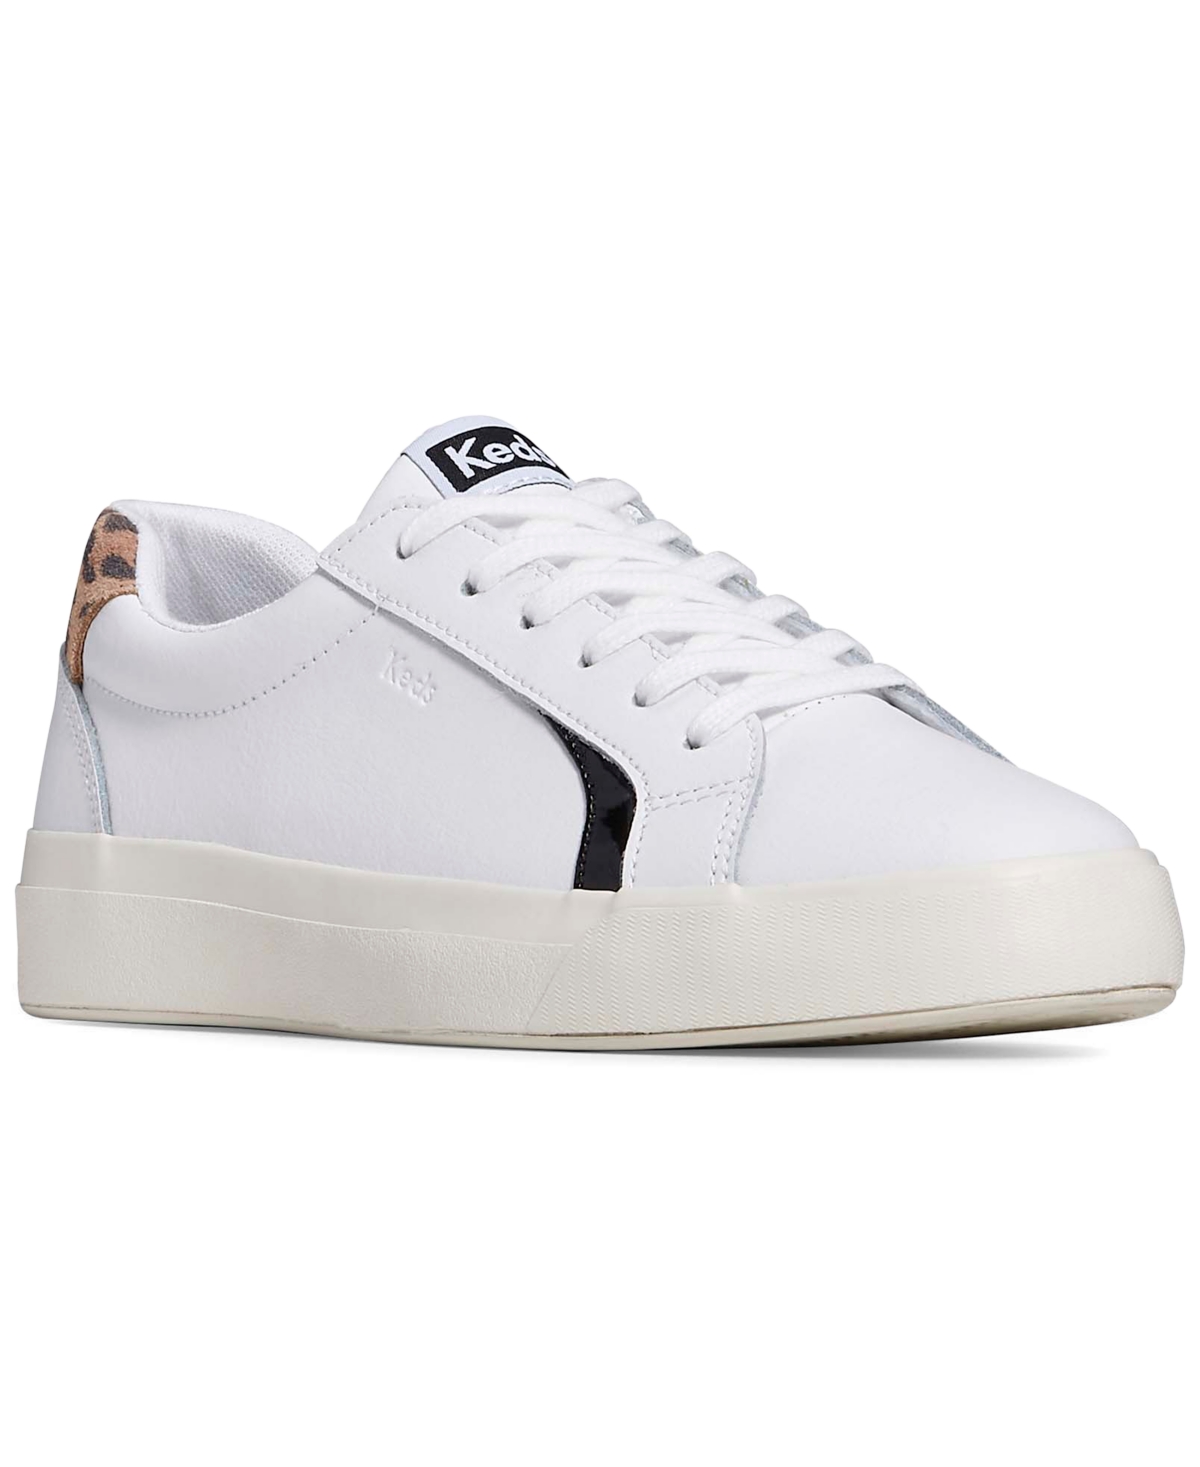 Women's Pursuit Leather Lace-Up Casual Sneakers from Finish Line - White, Leopard